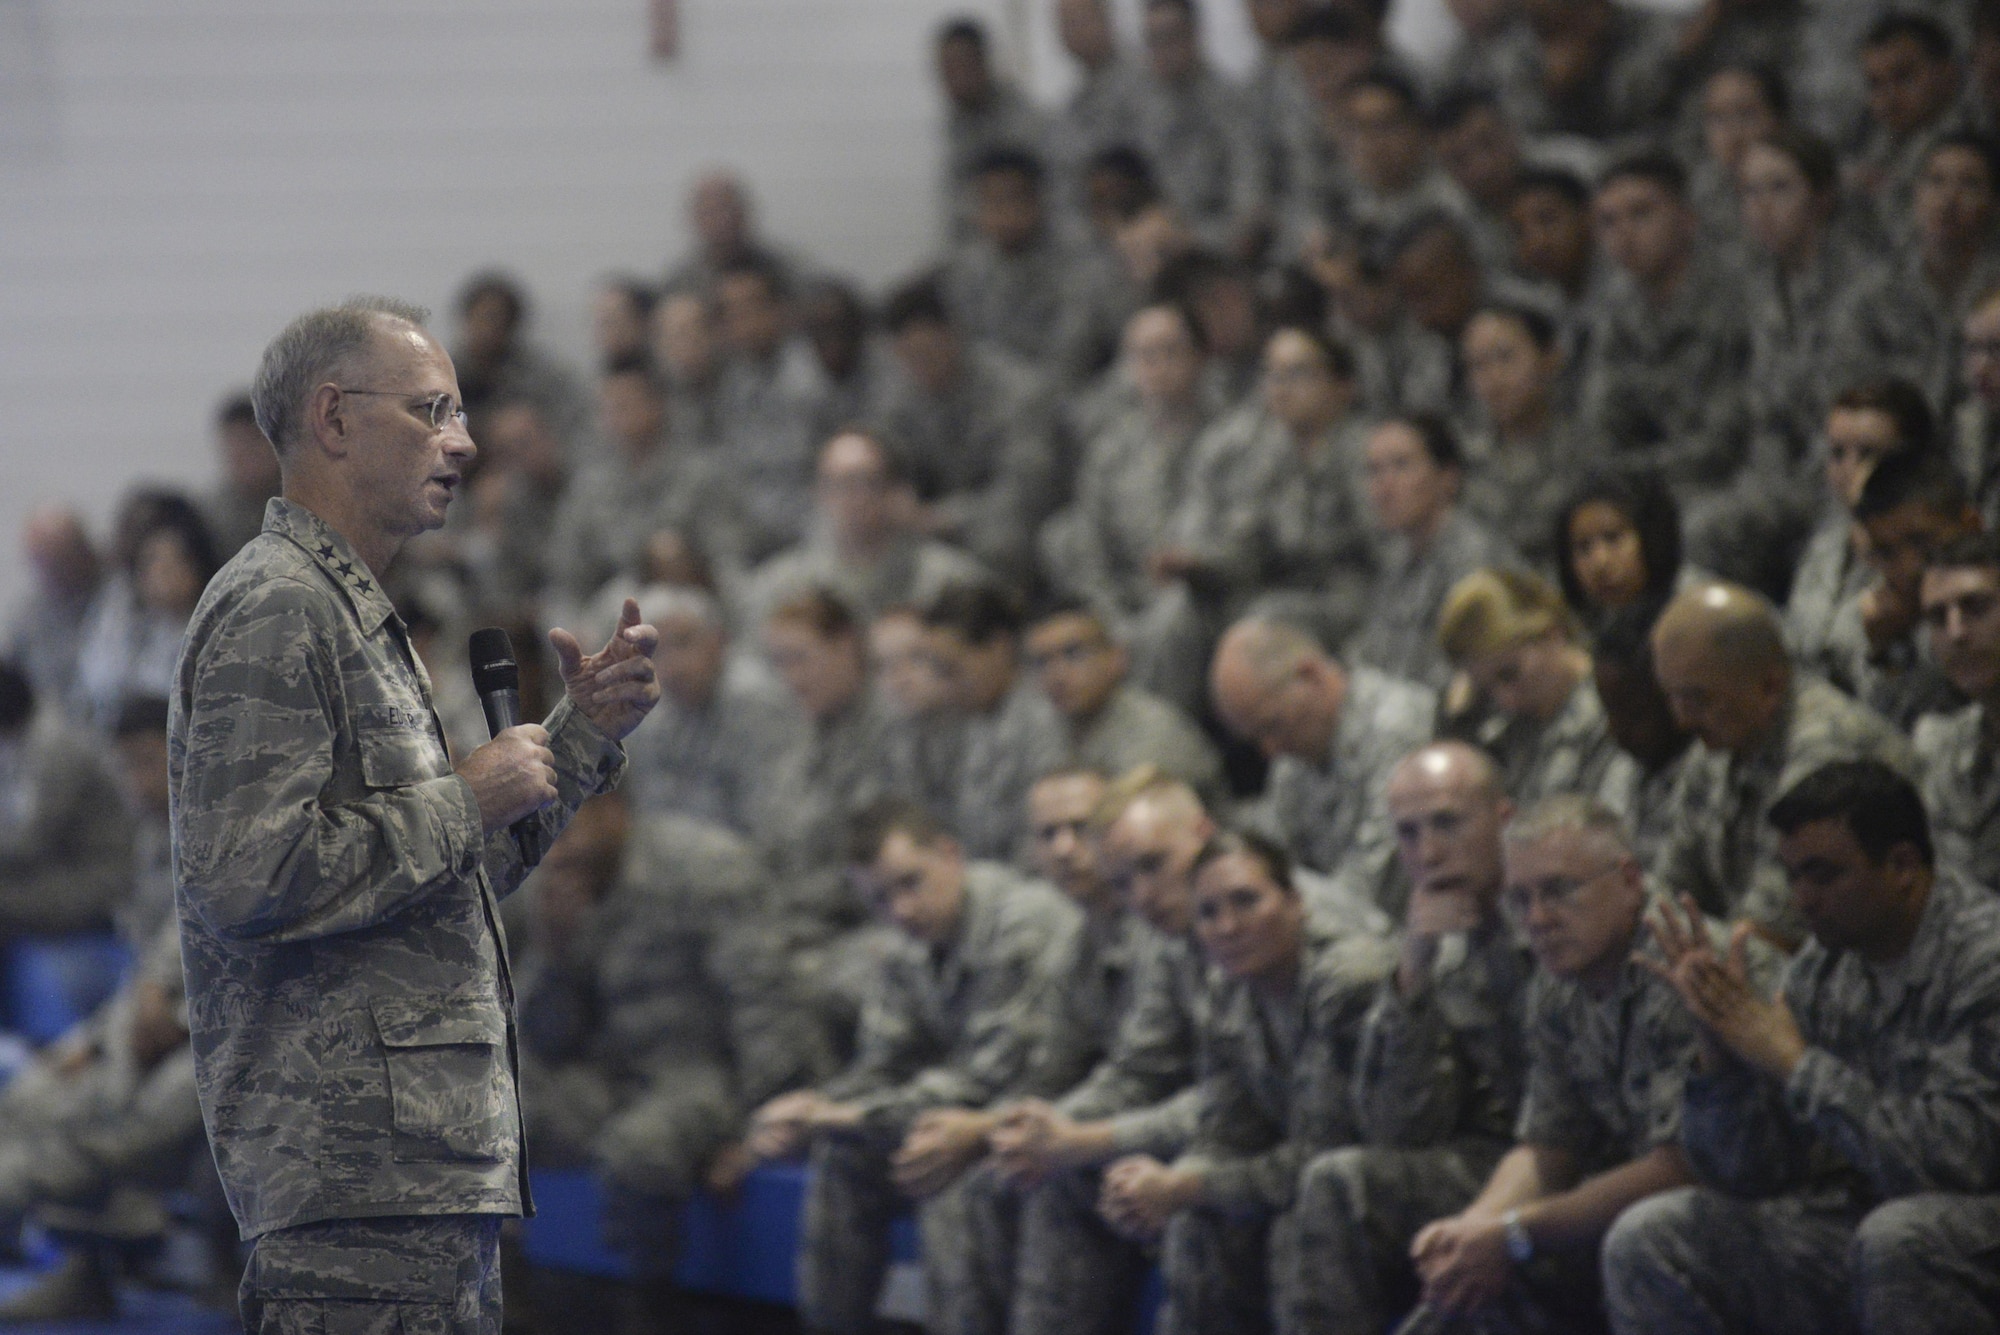 U.S. Air Force Lt. Gen Mark A. Ediger, Surgeon General of the Air Force, speaks to members of the 48th Medical Group during an all-call at Royal Air Force Lakenheath, England, July 25. Ediger held the all-call to express the importance of the medical mission and to encourage Airmen to ask questions about upcoming changes to their career field. (U.S. Air Force Photo by Airman Eli Chevalier)